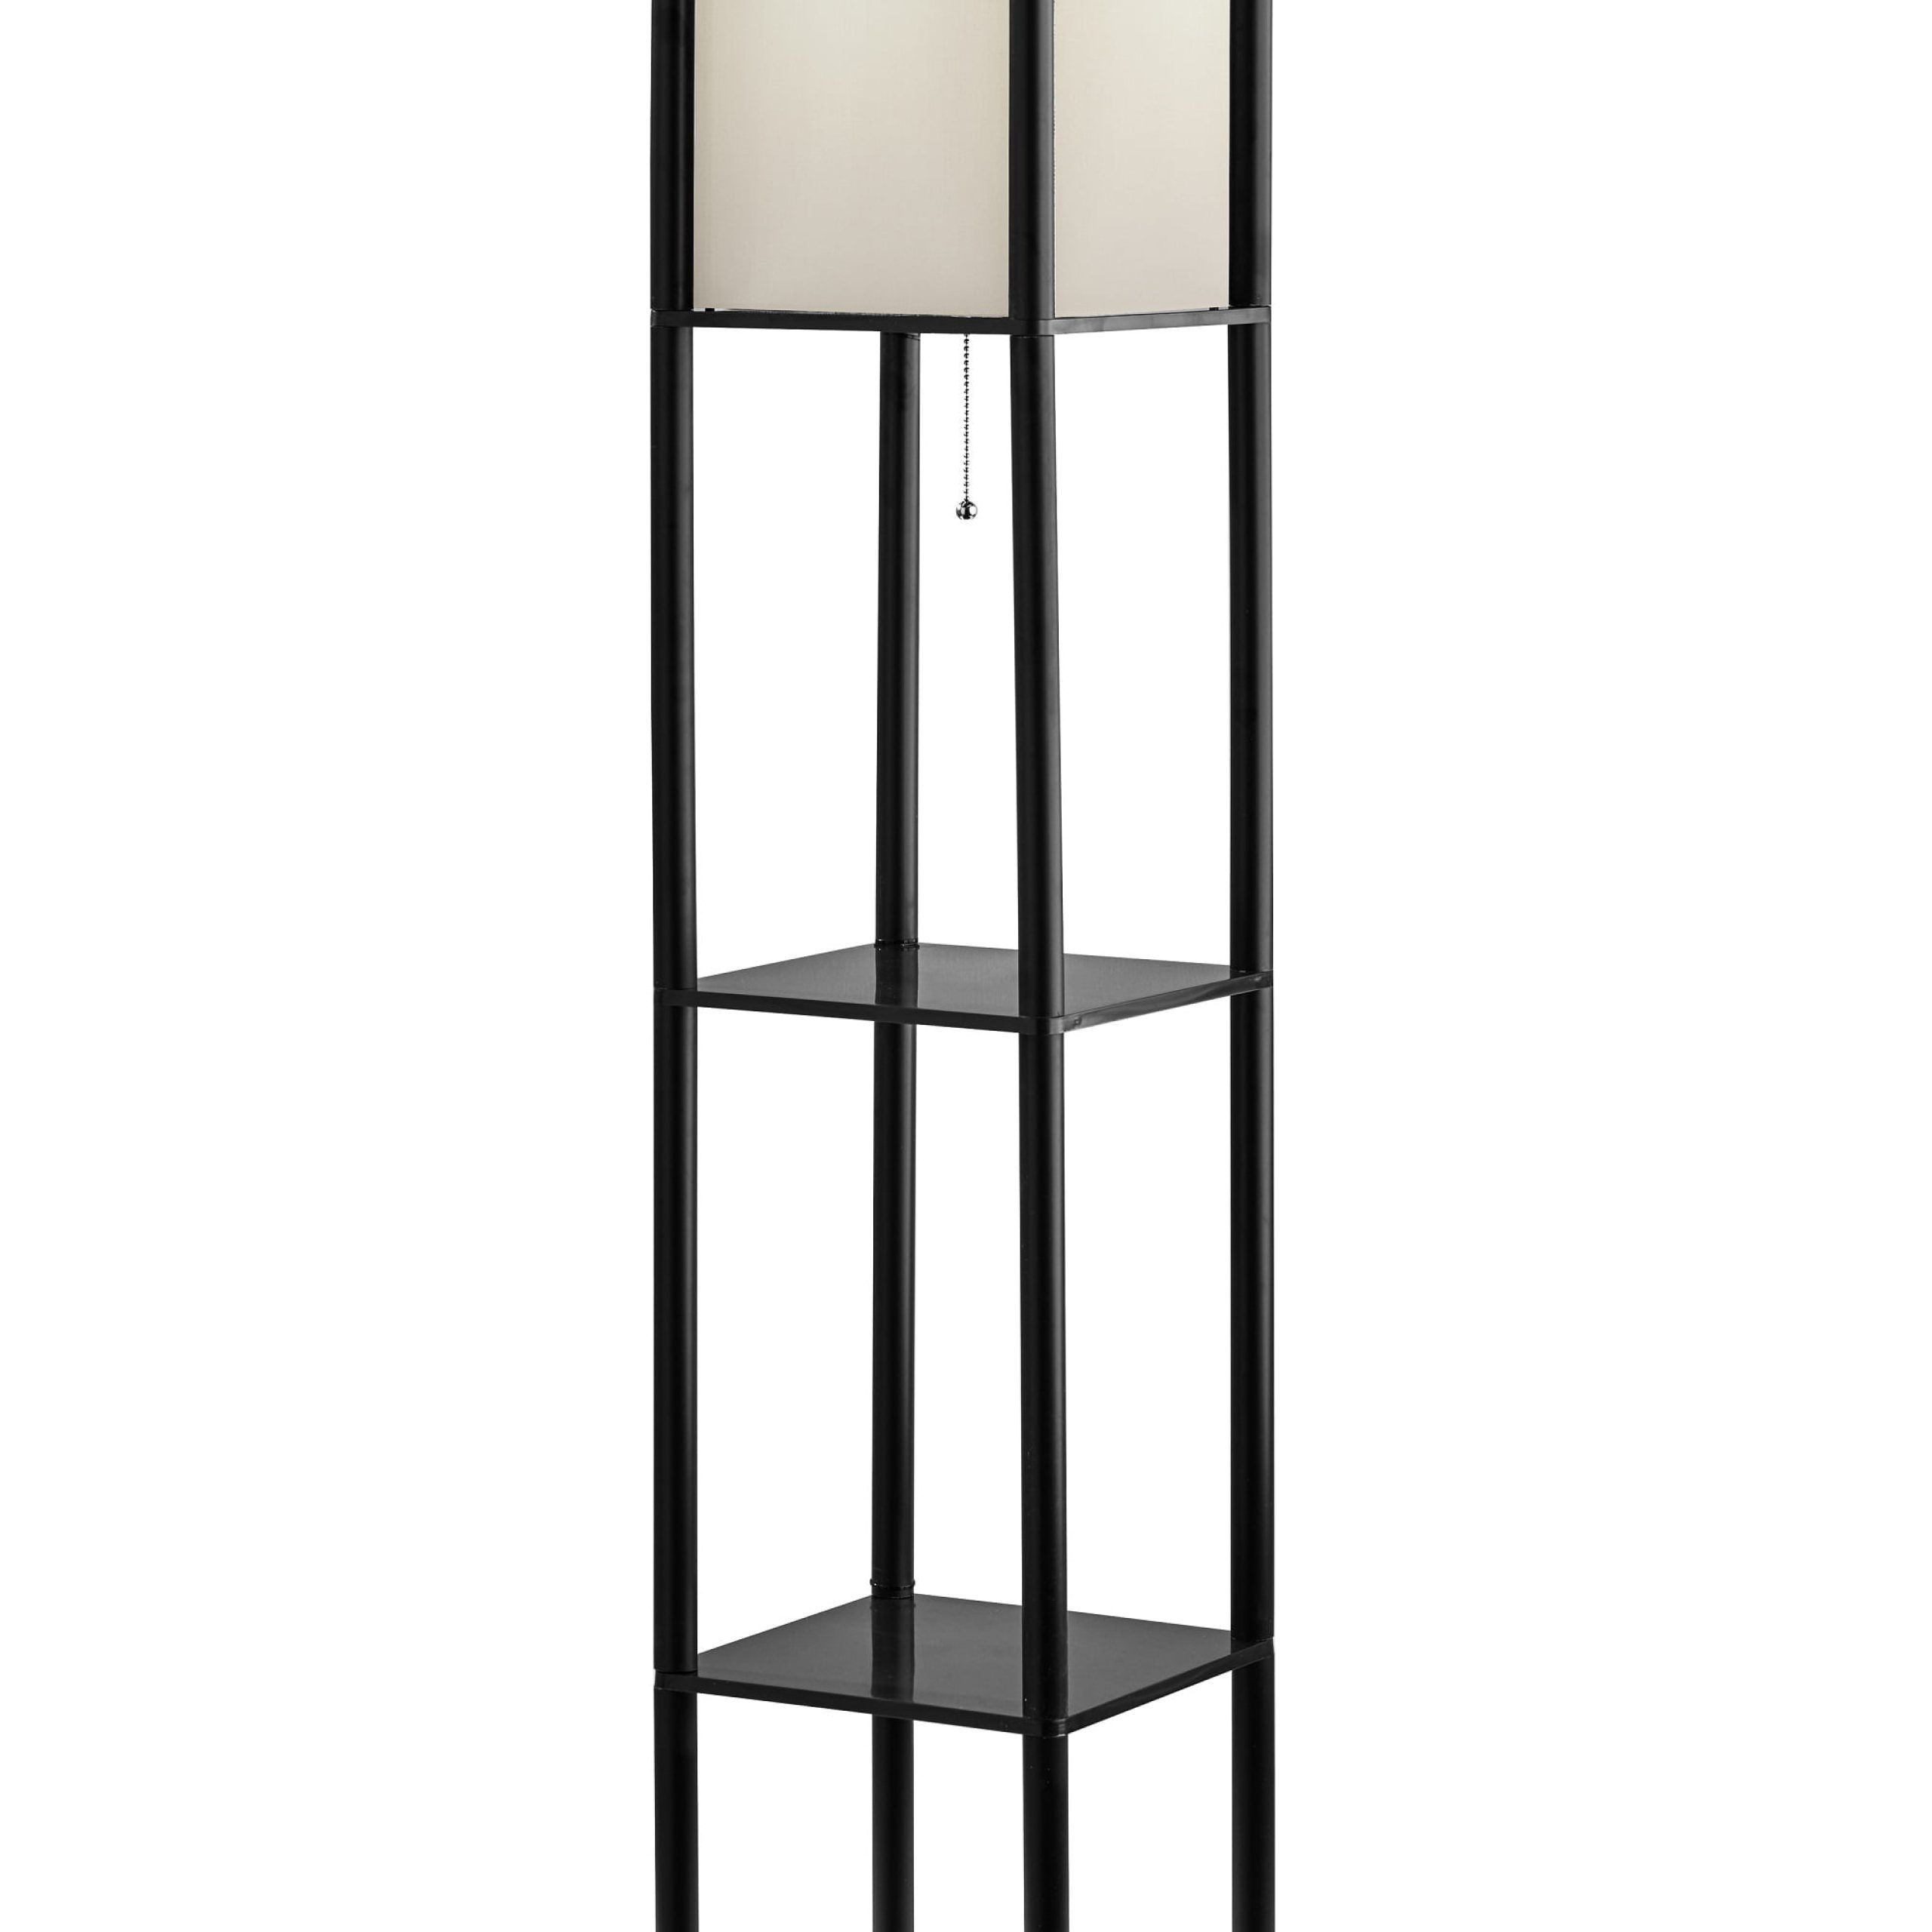 Mainstays 62 Inch Tall Shelf Floor Lamp, Black With White Fabric Shade –  Walmart With 62 Inch Floor Lamps (View 3 of 20)